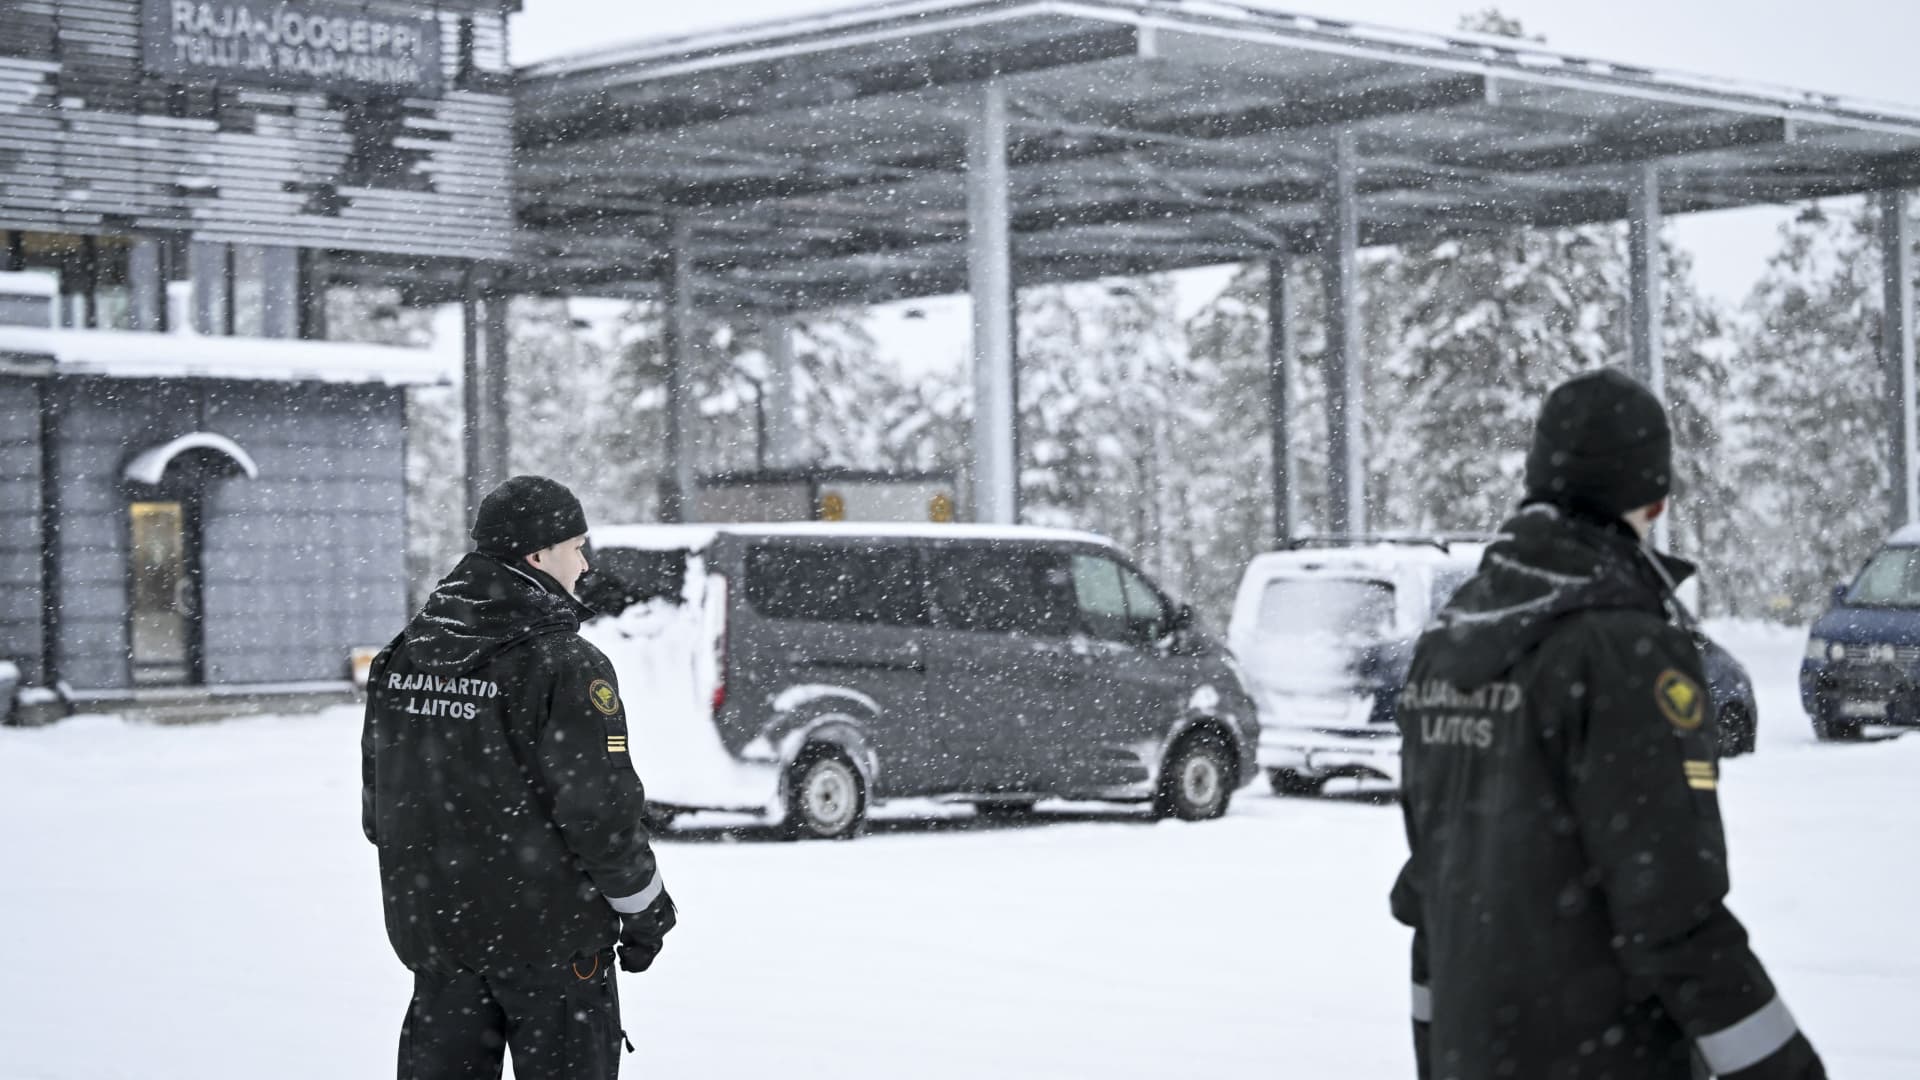 Finnish border guard officers walk in the snow at the Raja-Jooseppi border crossing station to Russia in Inari, northern Finland, on November 25, 2023. Raja-Jooseppi in the far north of Finnish Lapland is the only crossing point open on the country's eastern border. Finland has closed seven checkpoints in response to Russian officials allowing increasing numbers of undocumented asylum seekers to pass through to the Finnish side of the border. (Photo by Emmi Korhonen / Lehtikuva / AFP) / Finland OUT (Photo by EMMI KORHONEN/Lehtikuva/AFP via Getty Images)